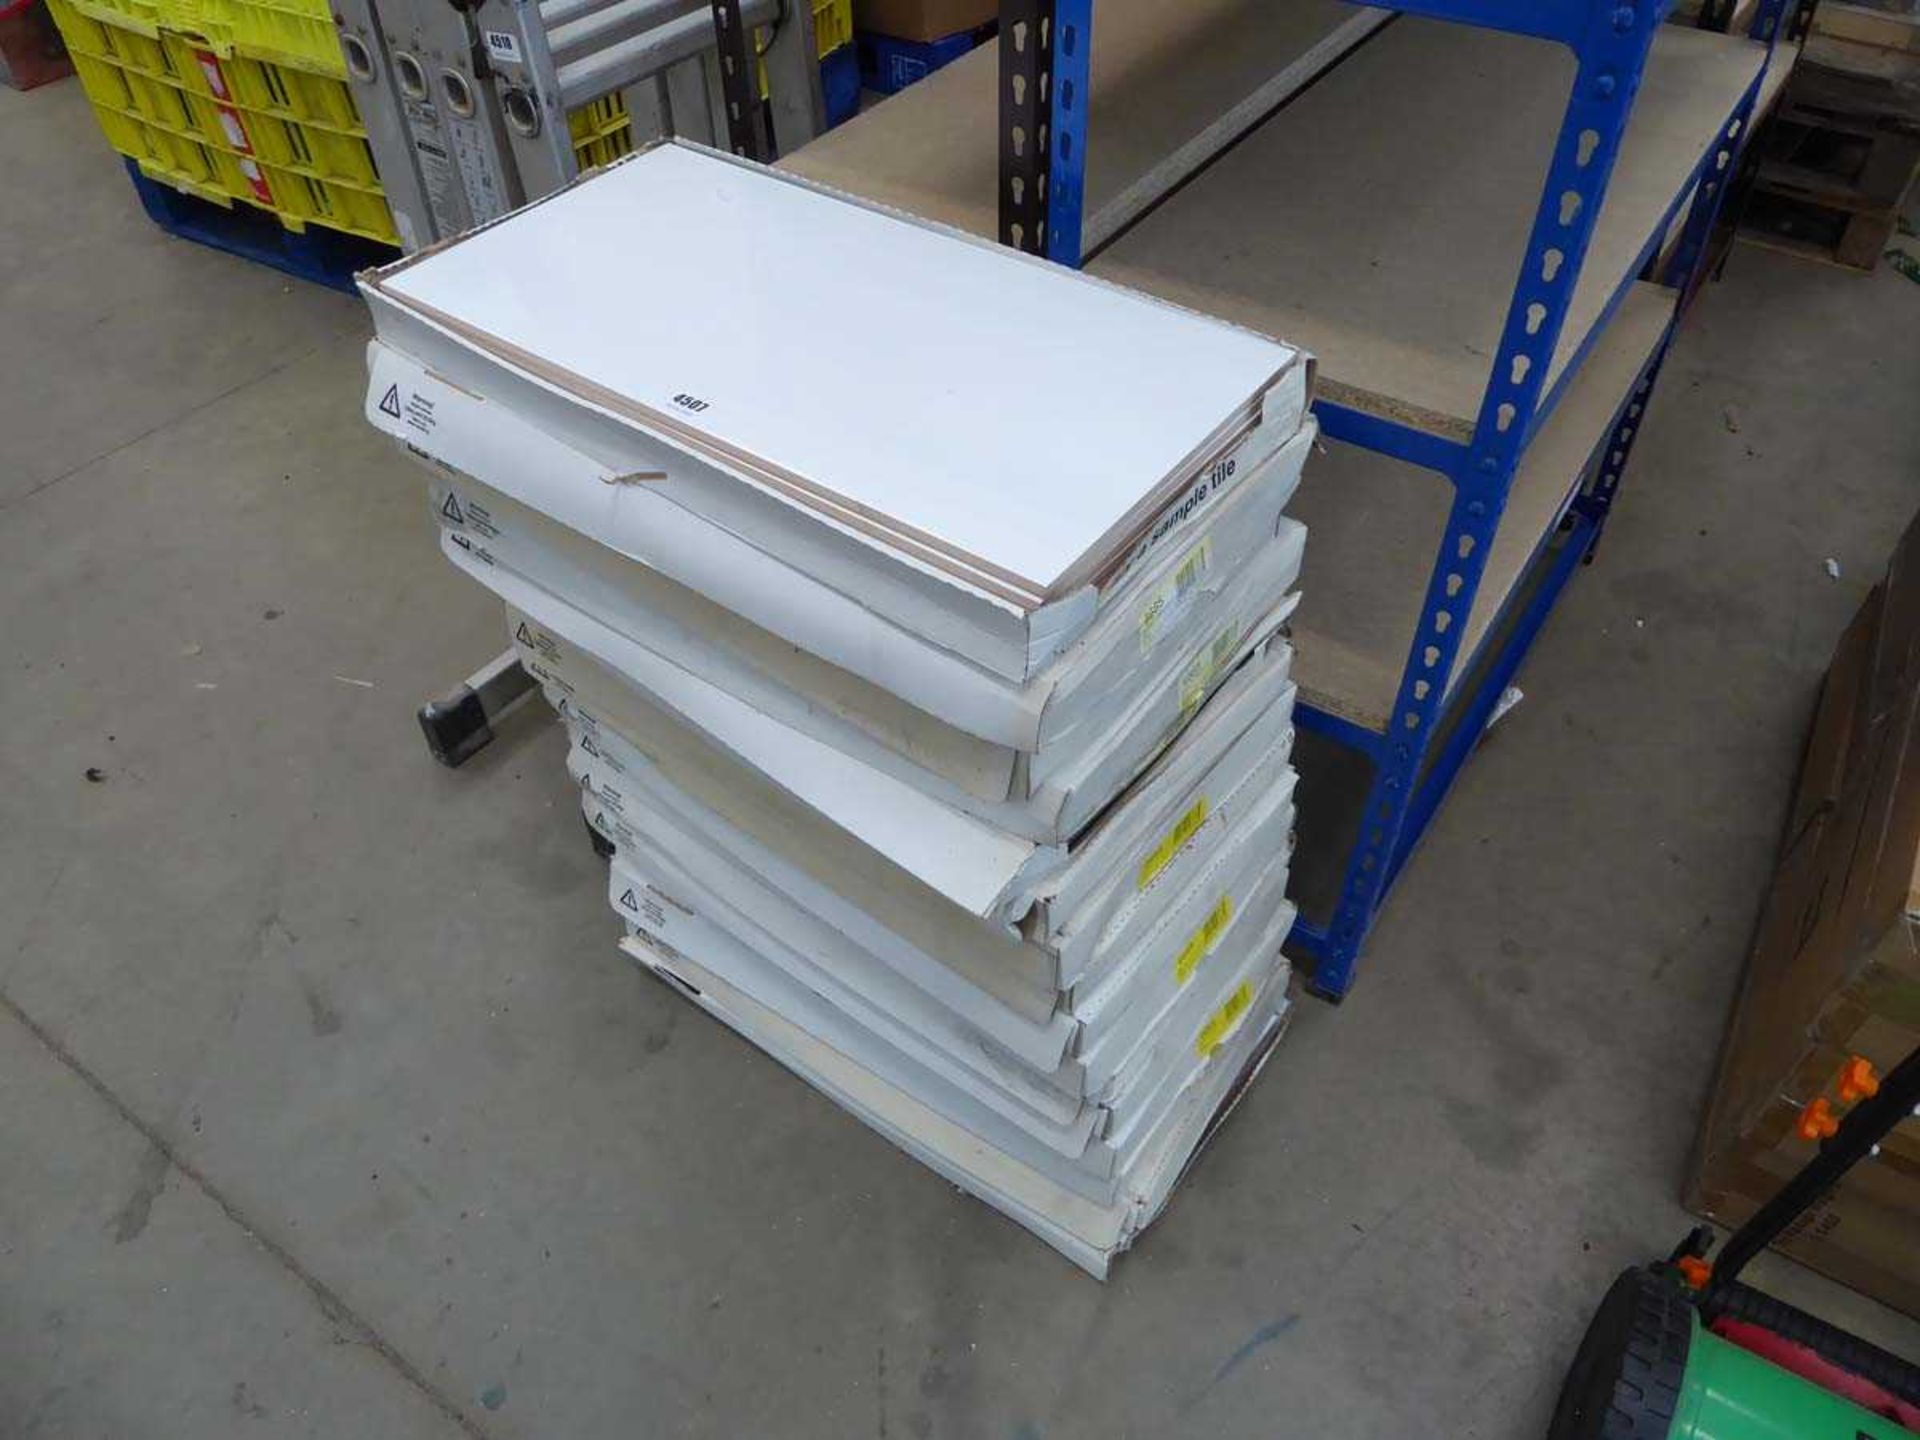 Approx. 17 packs of white tiles